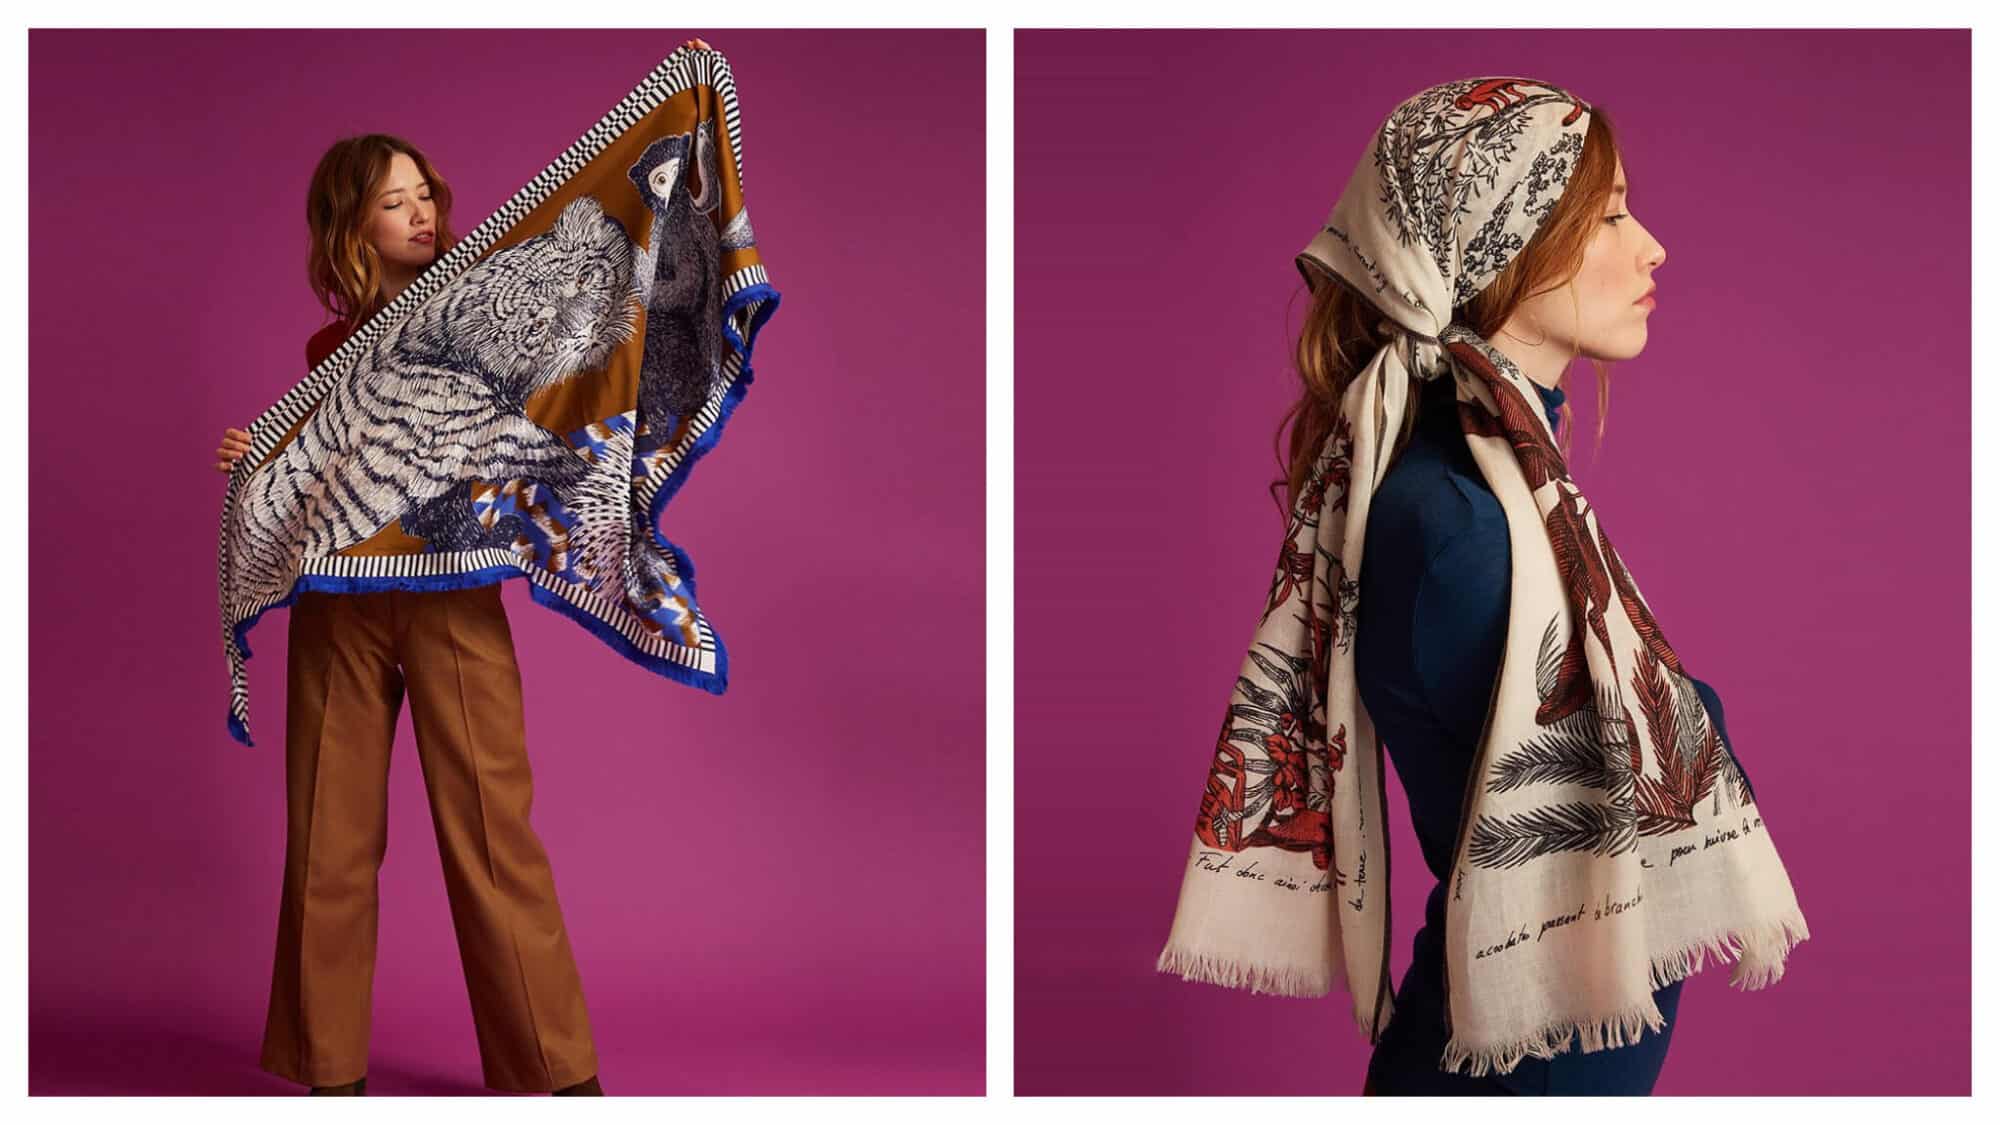 Left: A model stands against a purple background with an animal print scarf opened up in her hands
Right: A model pictured in profile with a scarf tied around her head in a bohemian style.